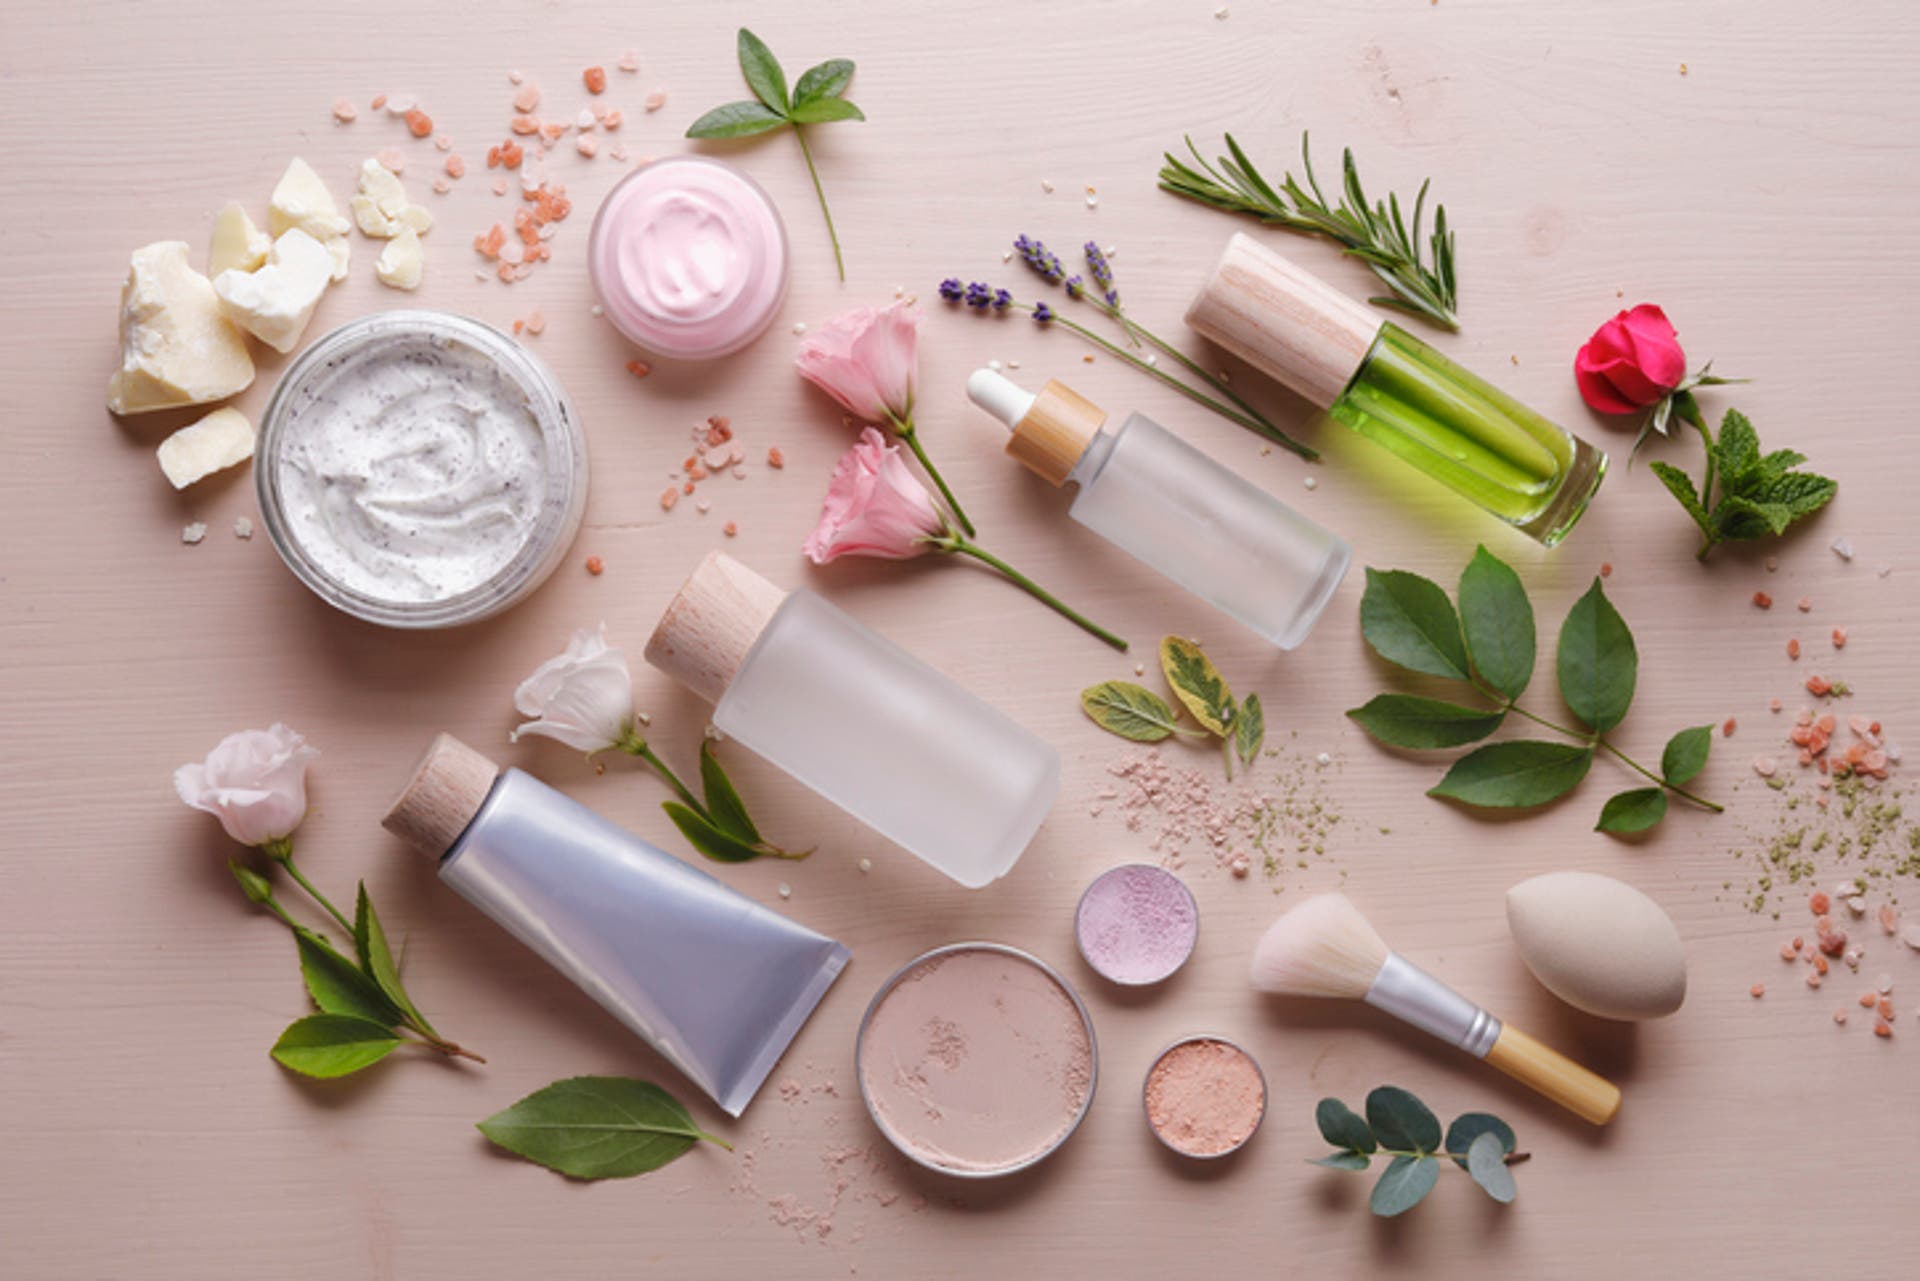  Zero waste and organic beauty products with leaves and flowers 